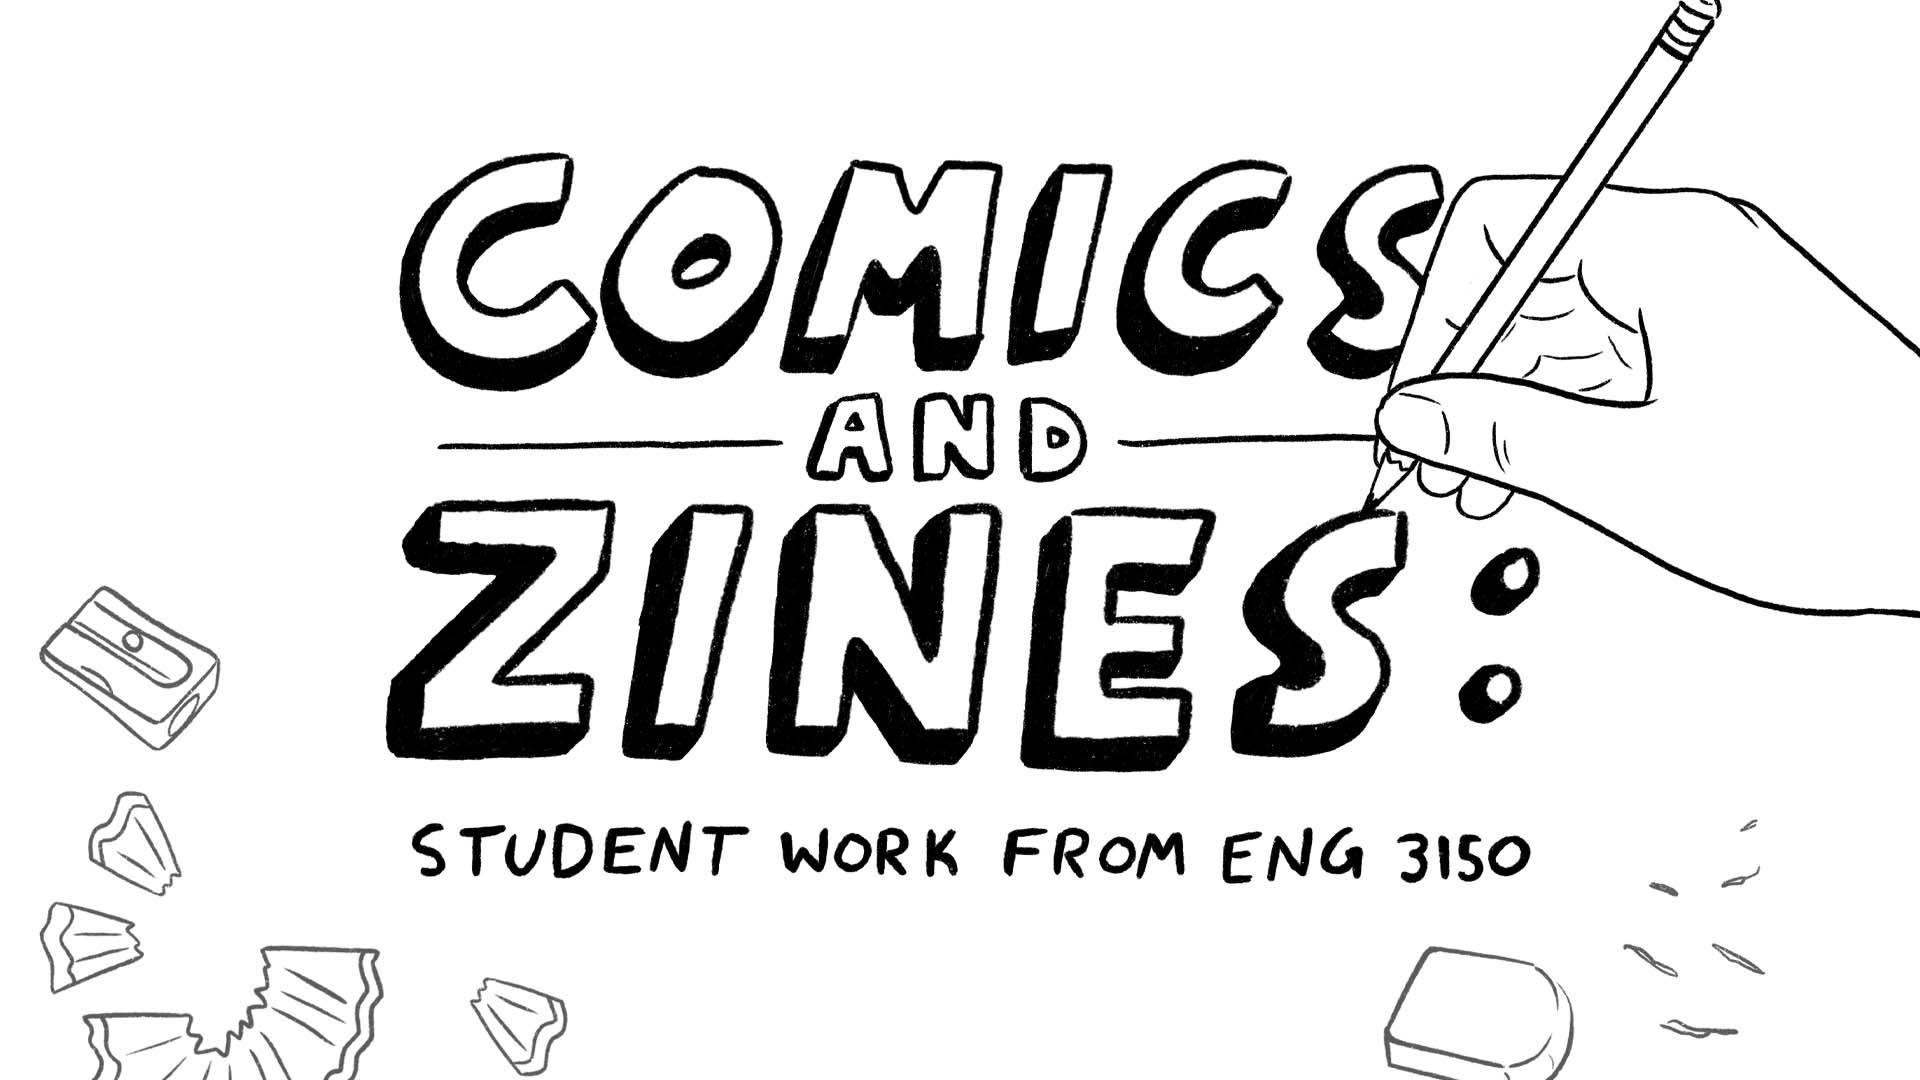 Comics and Zines: student work from ENG 3150. Drawn image of hand drawing the previous text with a pencil